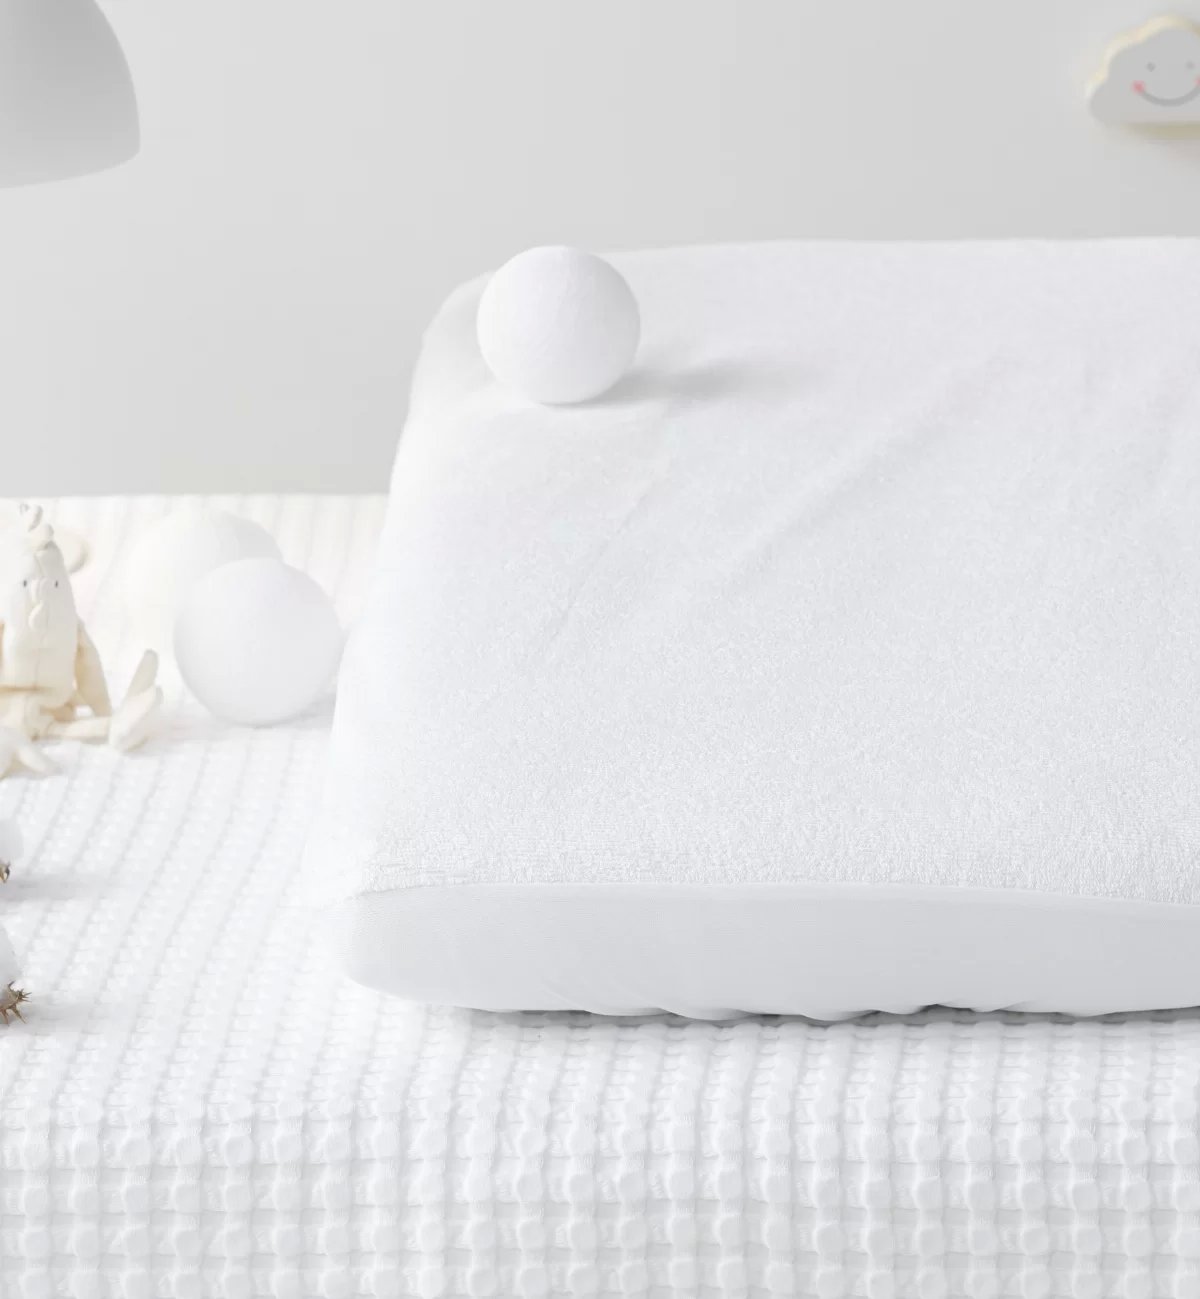 How do I clean my child's mattress after bedwetting?